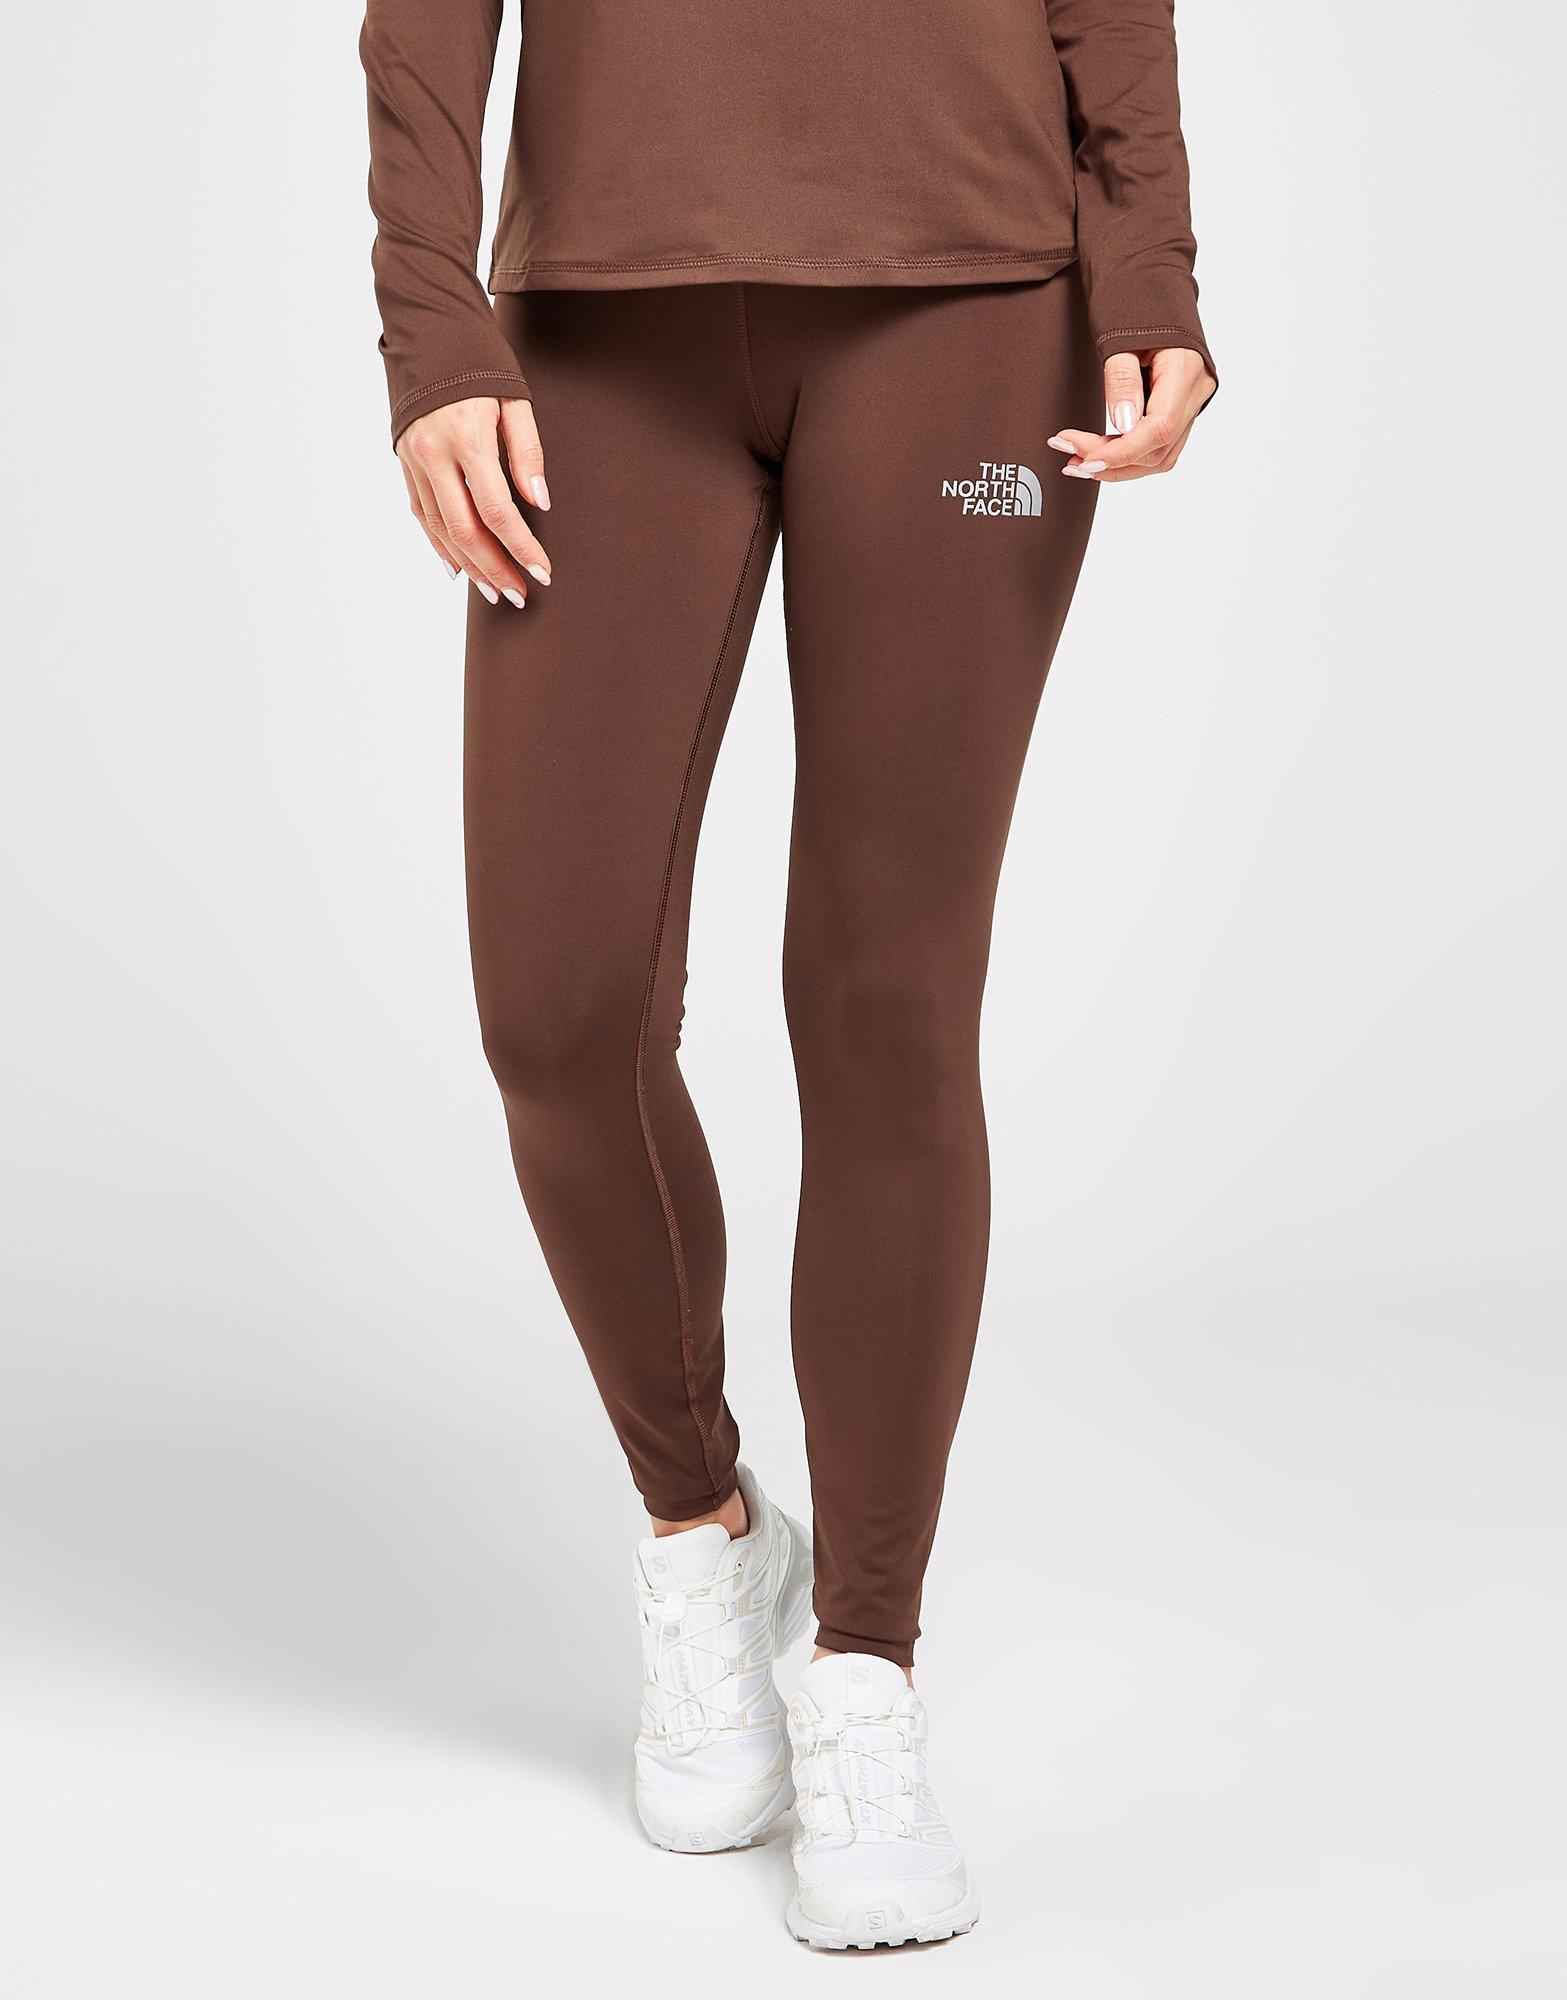 Brown The North Global Exploring Never Sports Stop Face JD - Tights